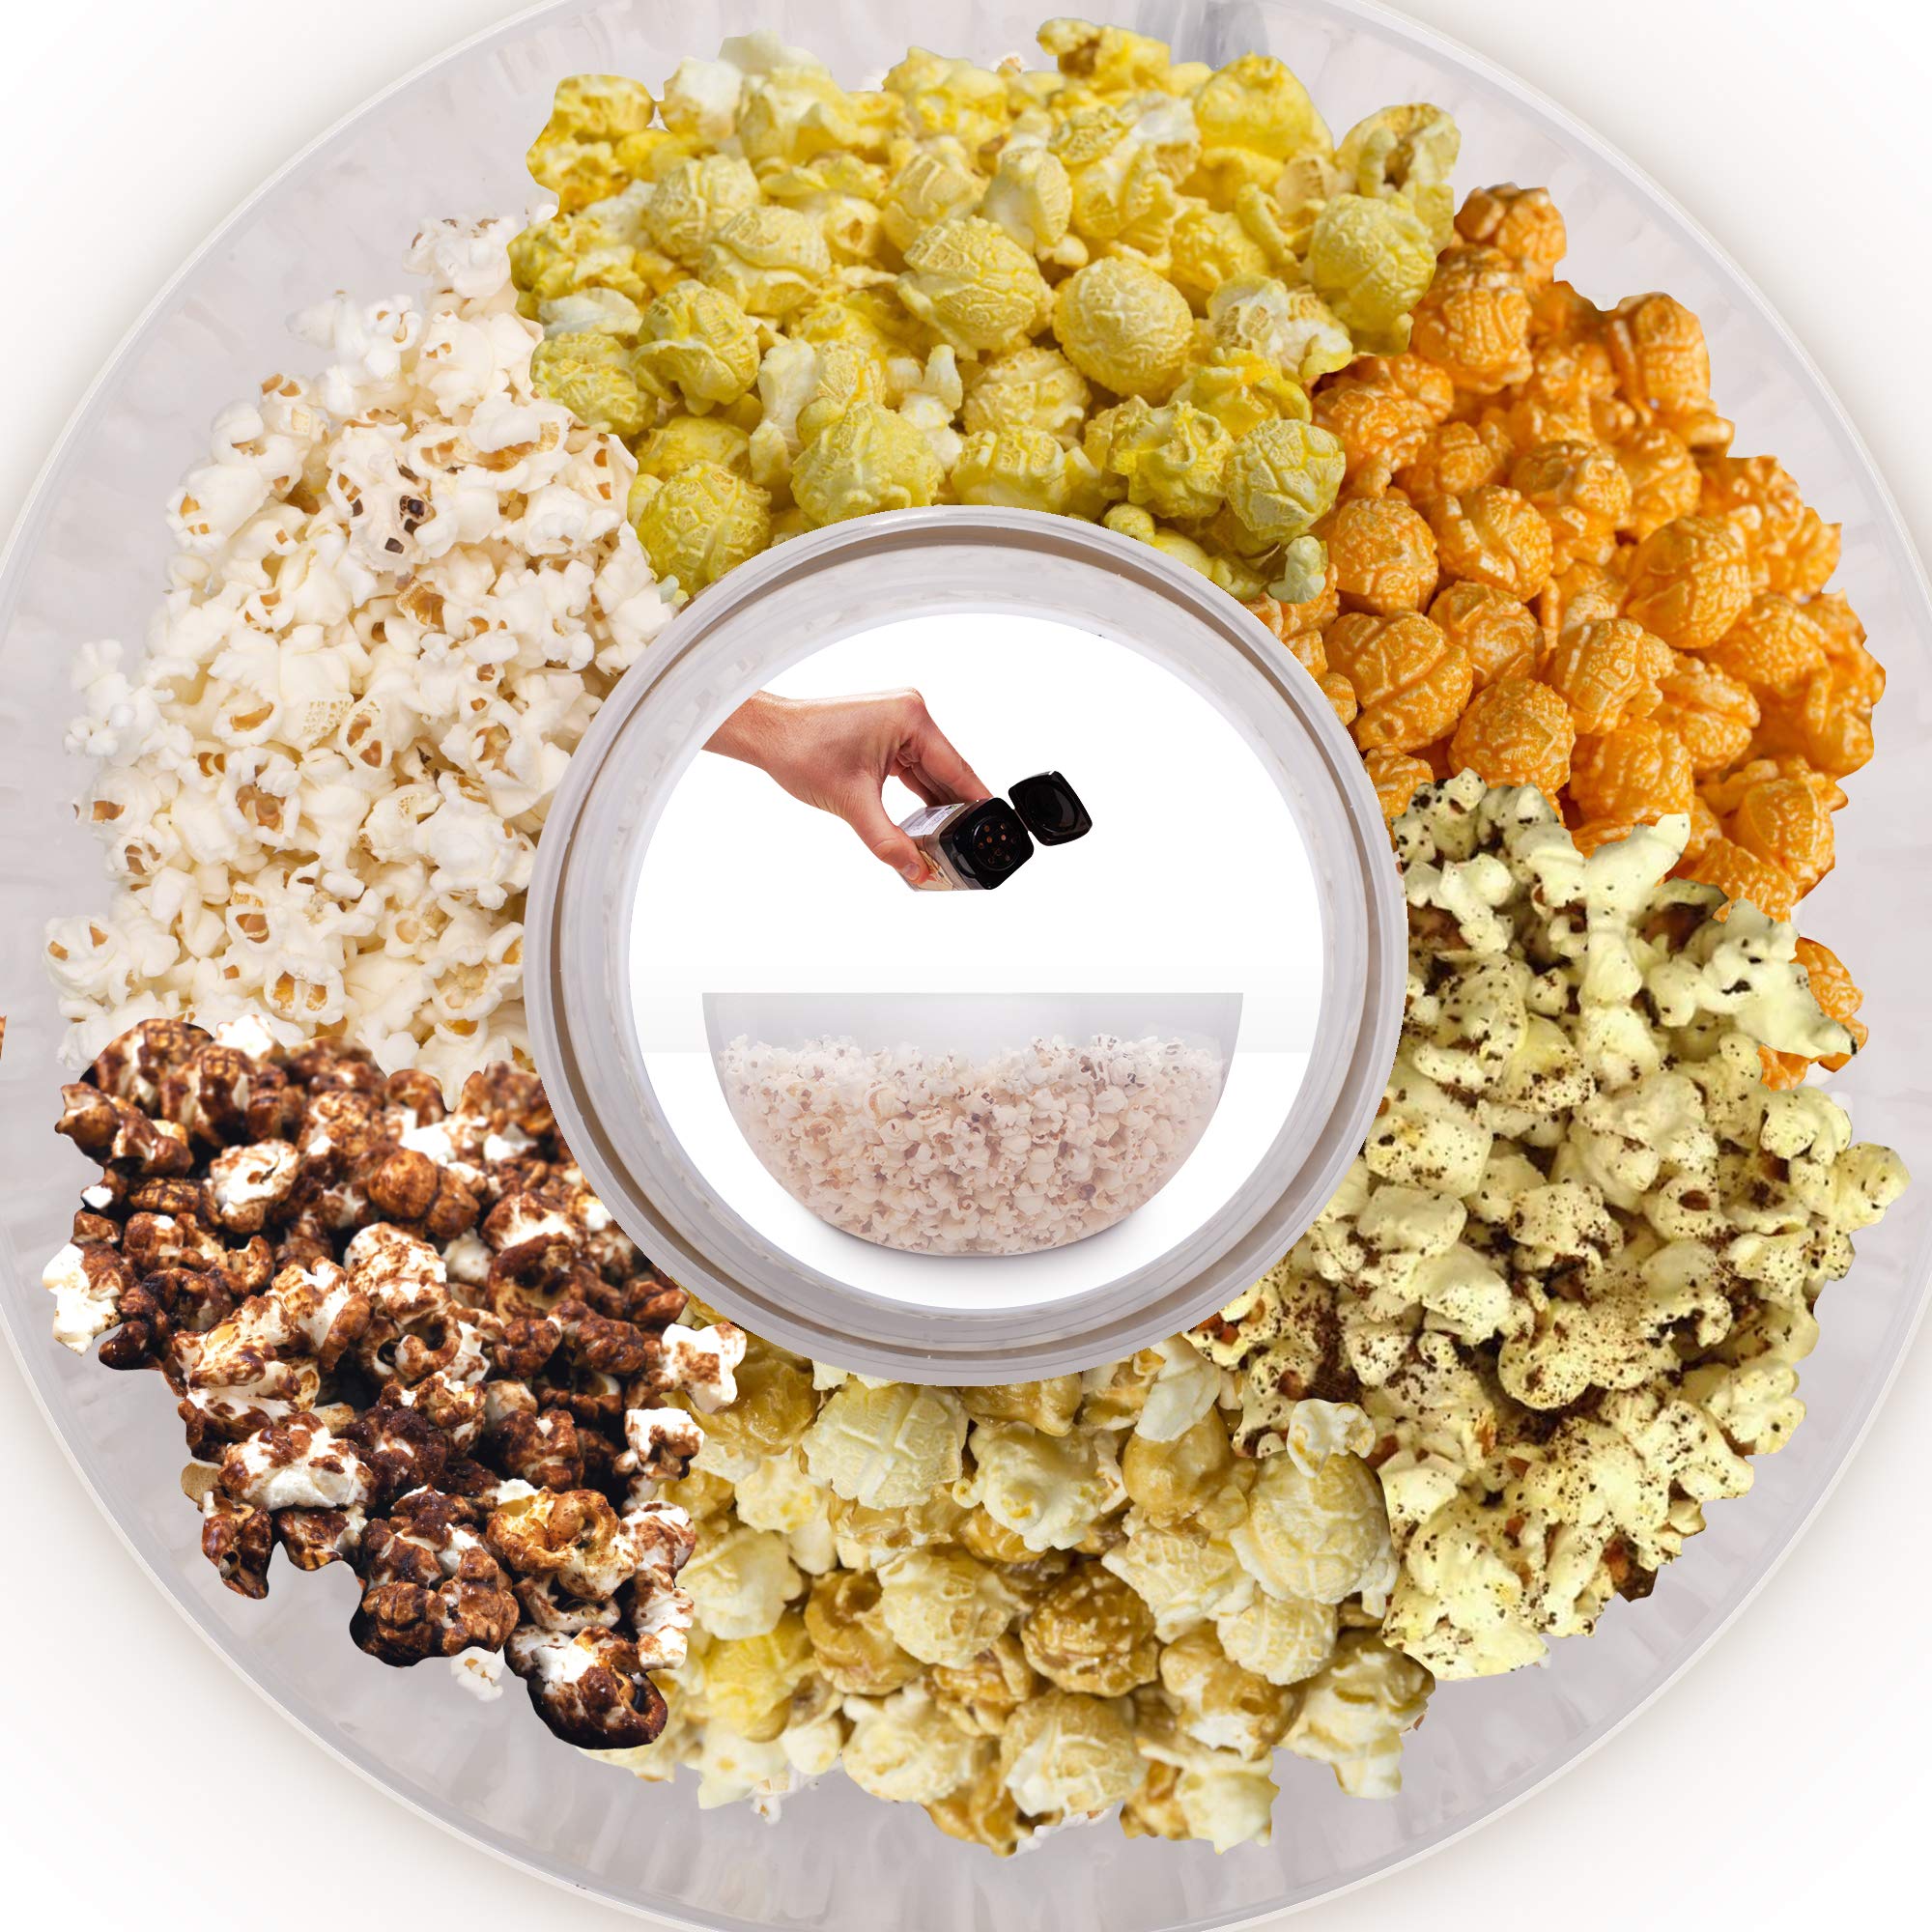 Duronic Popcorn Maker POP50-WE | Hot Air Corn Popper | Make Homemade Healthy Oil-Free Popcorn | Low Calorie Snacking | Comes with Measuring Cup and Serving Bowl | 1200W | White, Plastic